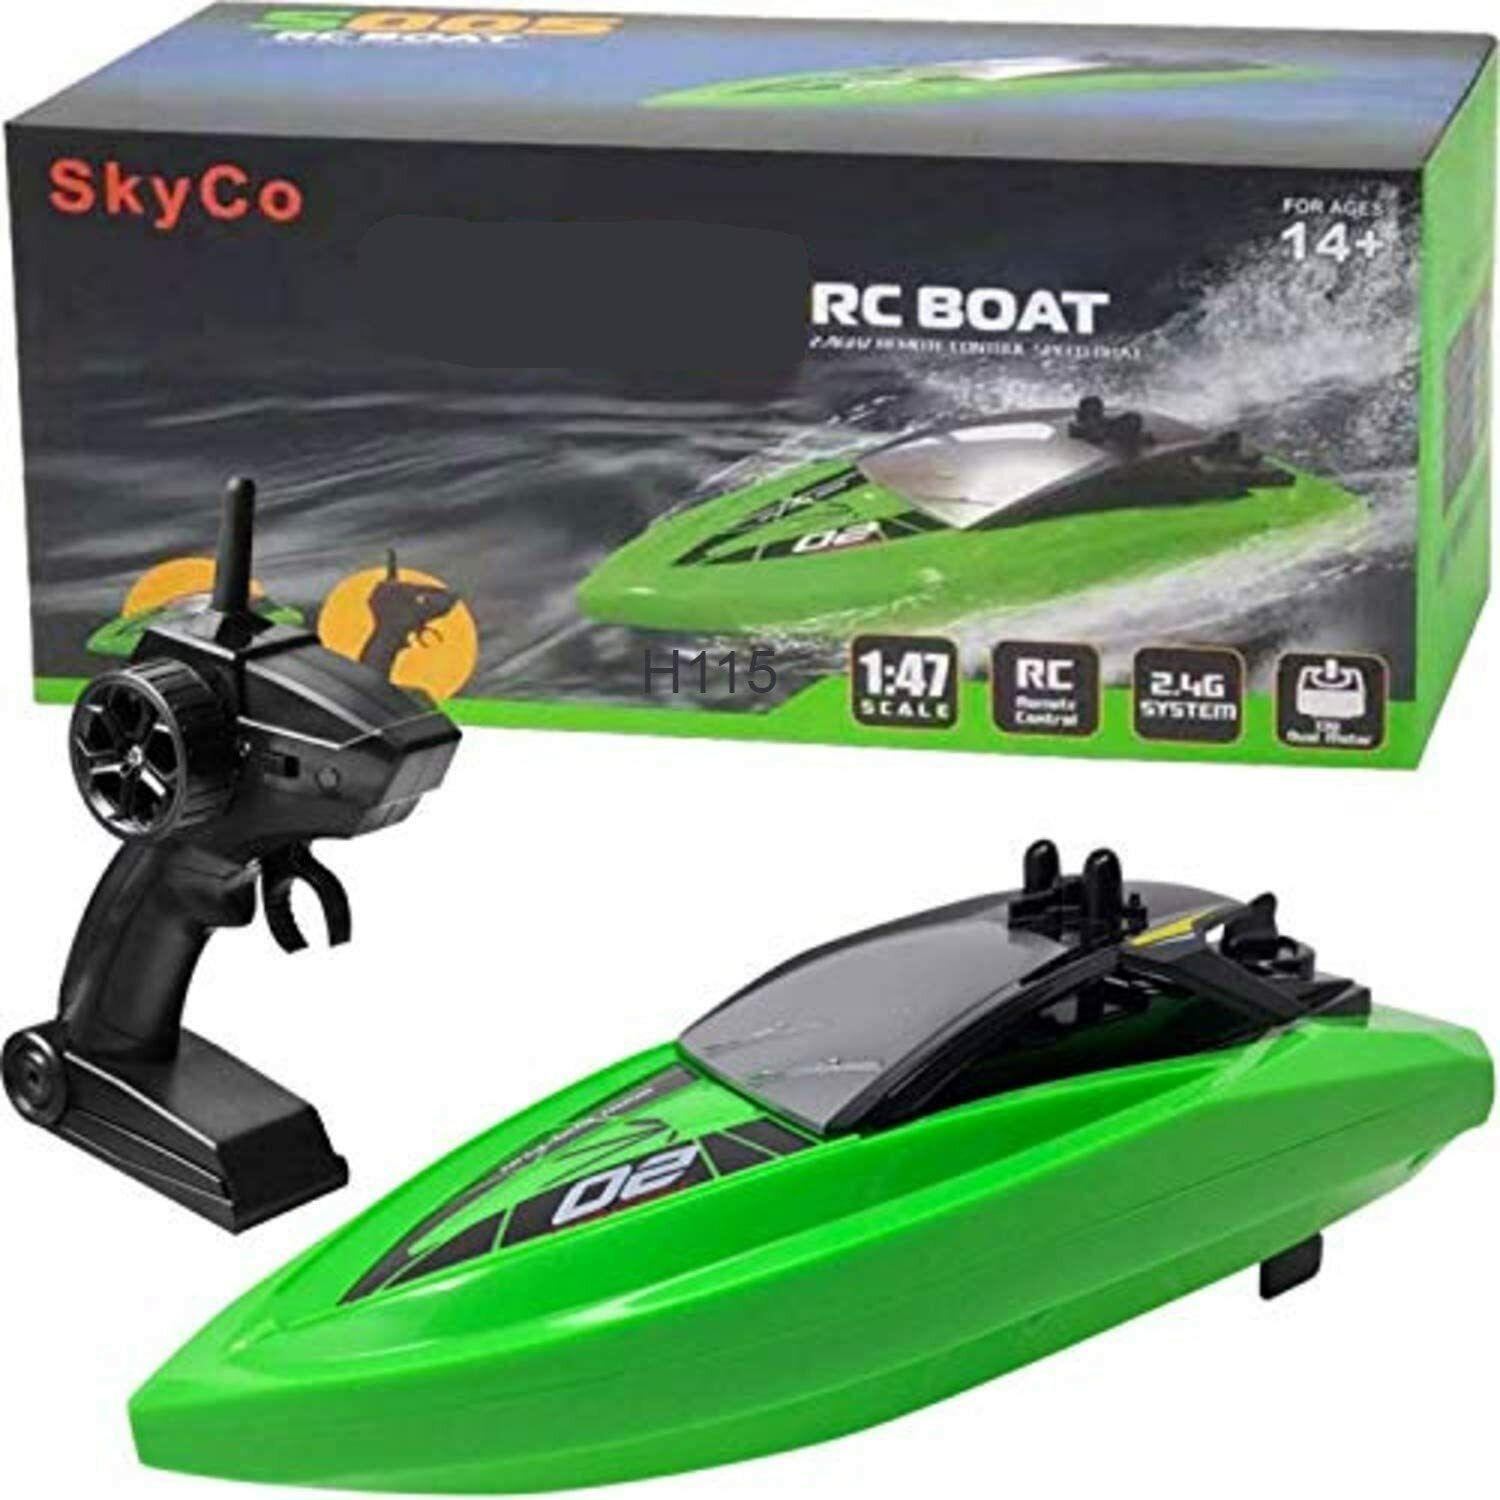 Green Rc Boat: Eco-friendly and efficient: The benefits of Green RC Boats